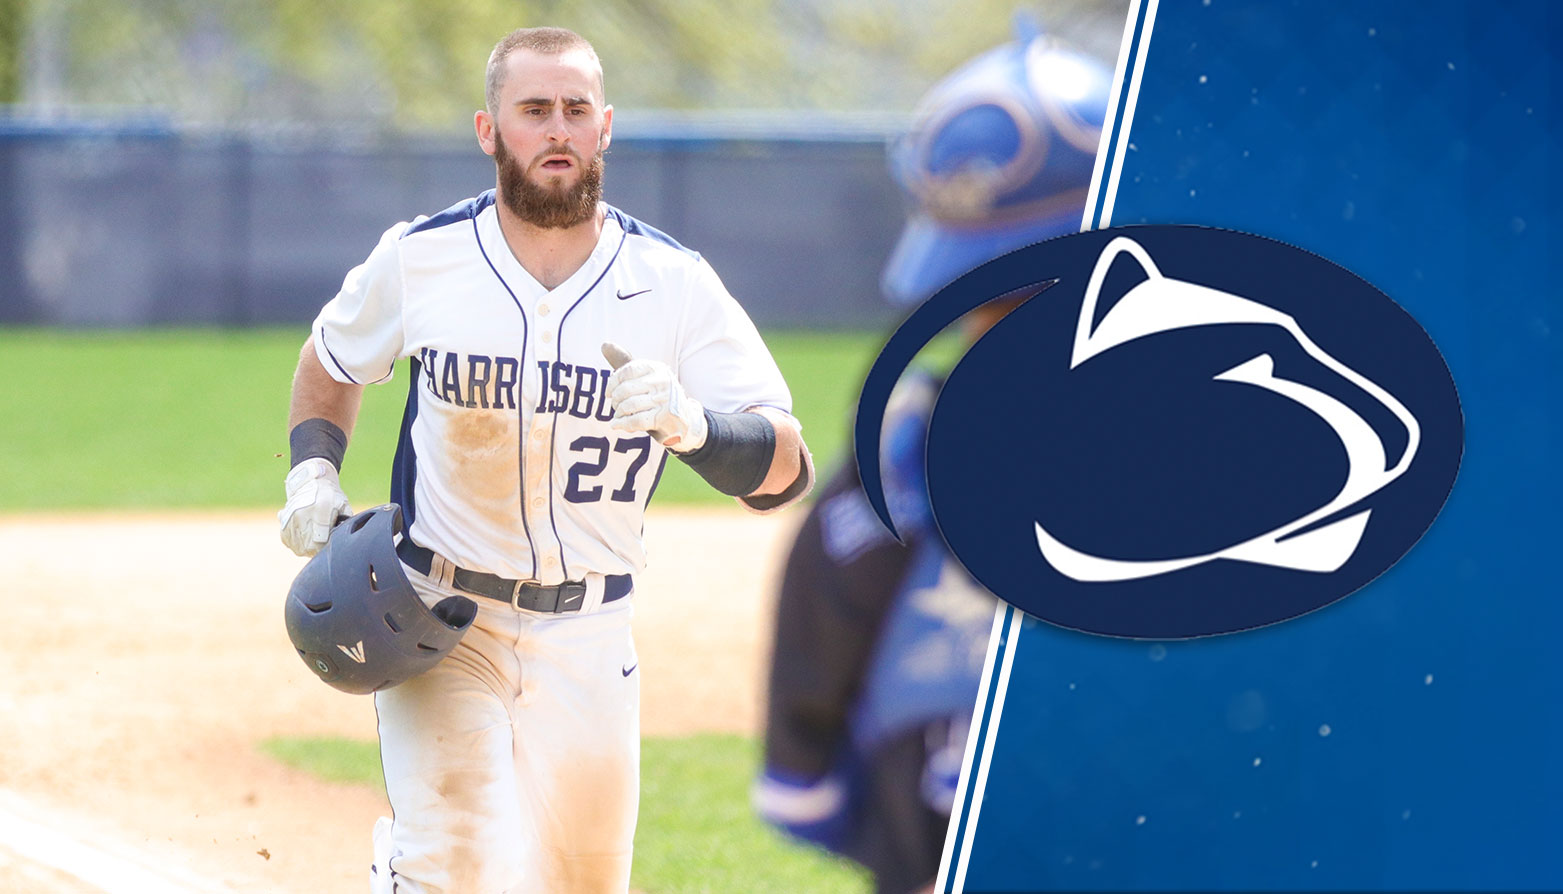 Chase Smith's Three Home Runs Leads Penn State Harrisburg to CAC Championship Game 1 Victory over CNU